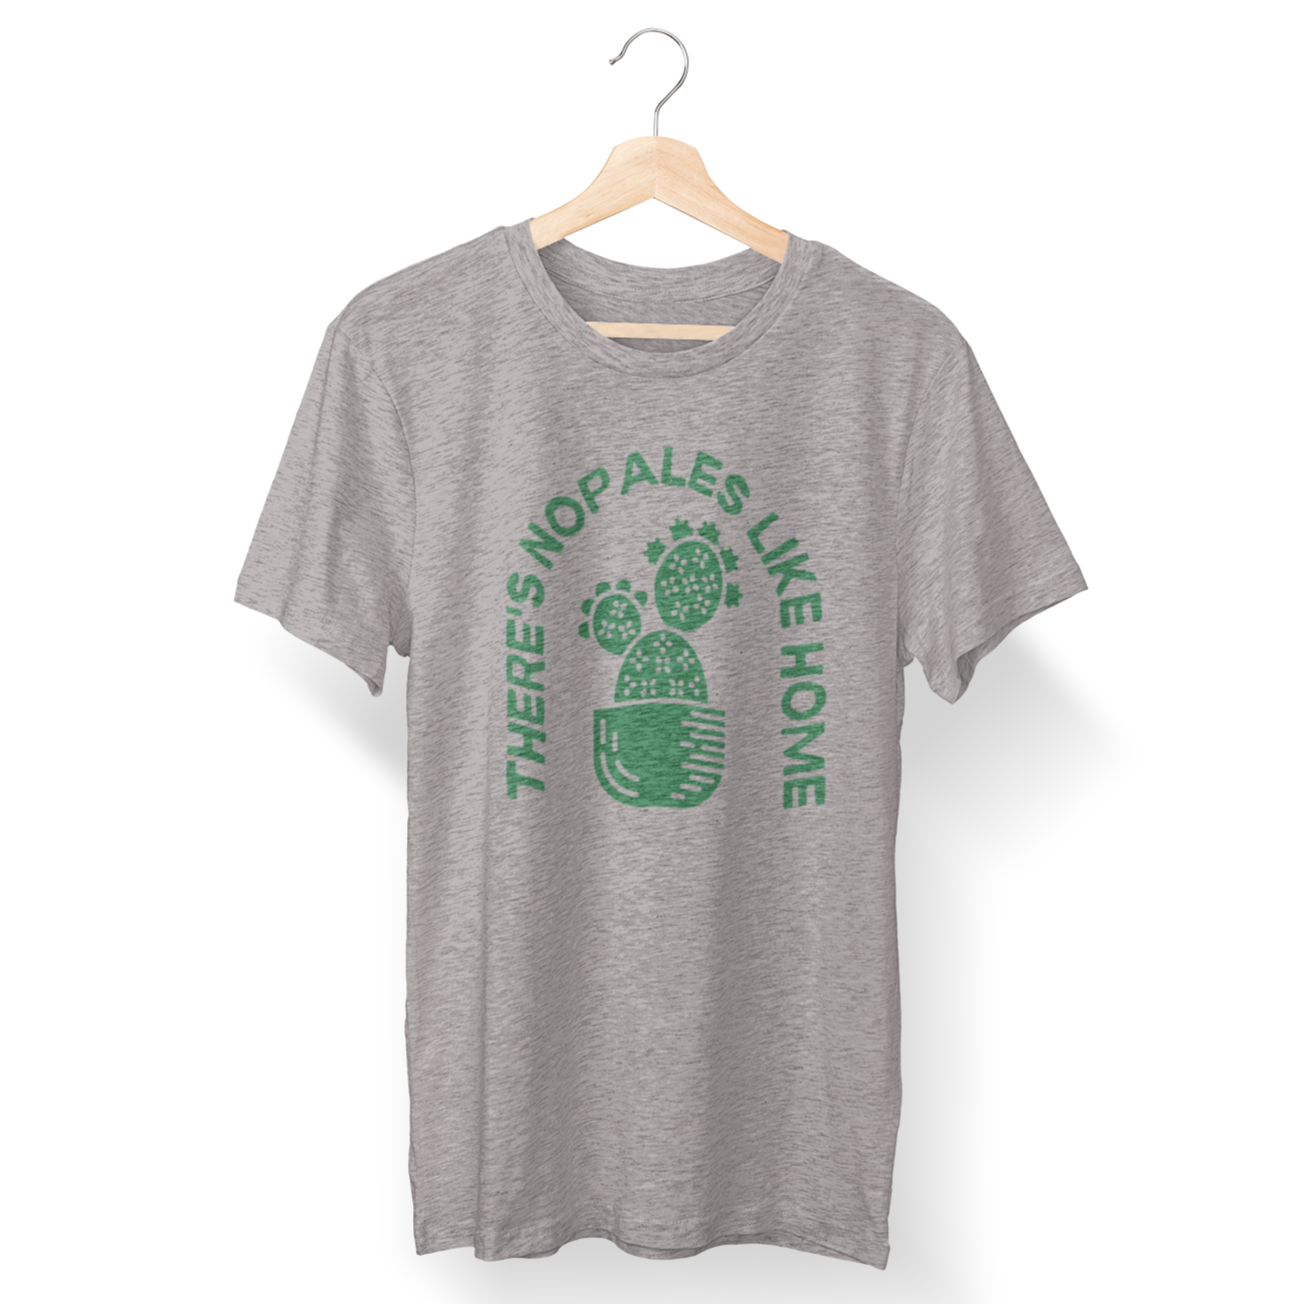 There's Nopales Like Home Women's T-Shirt